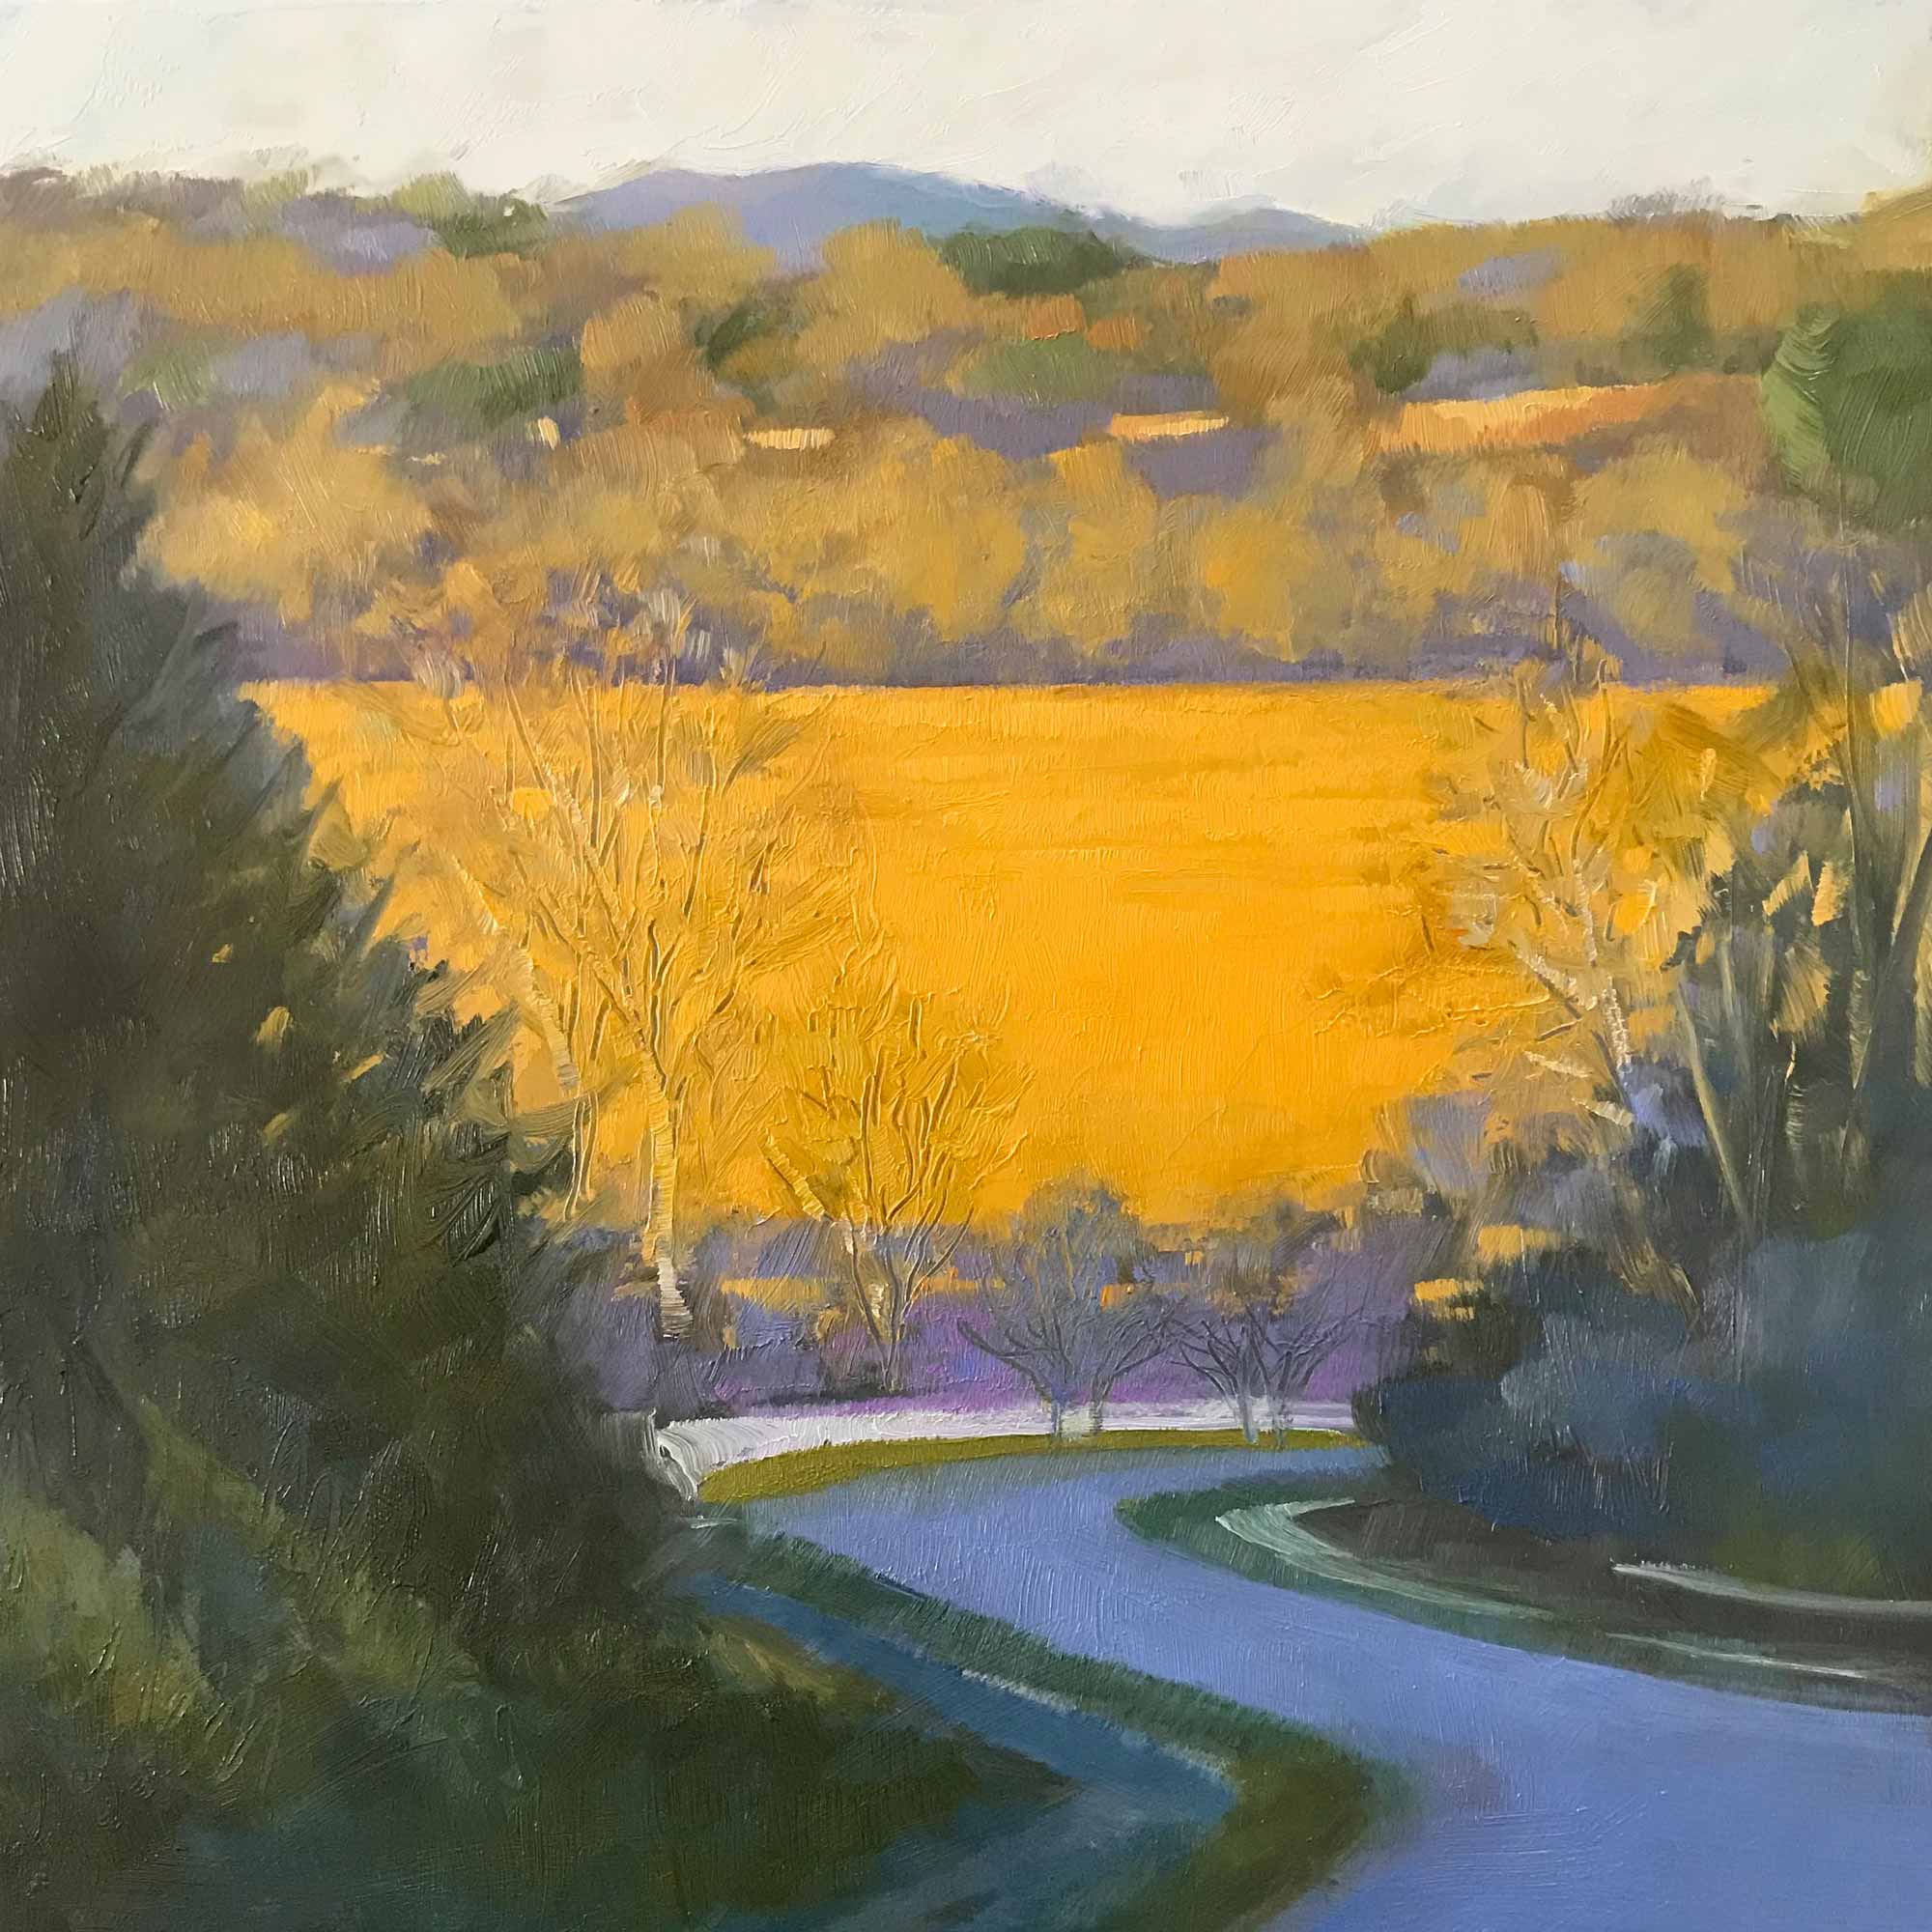 View from the Ridge No. 8, oil on panel, 8 x 8 inches, 2019, SOLD